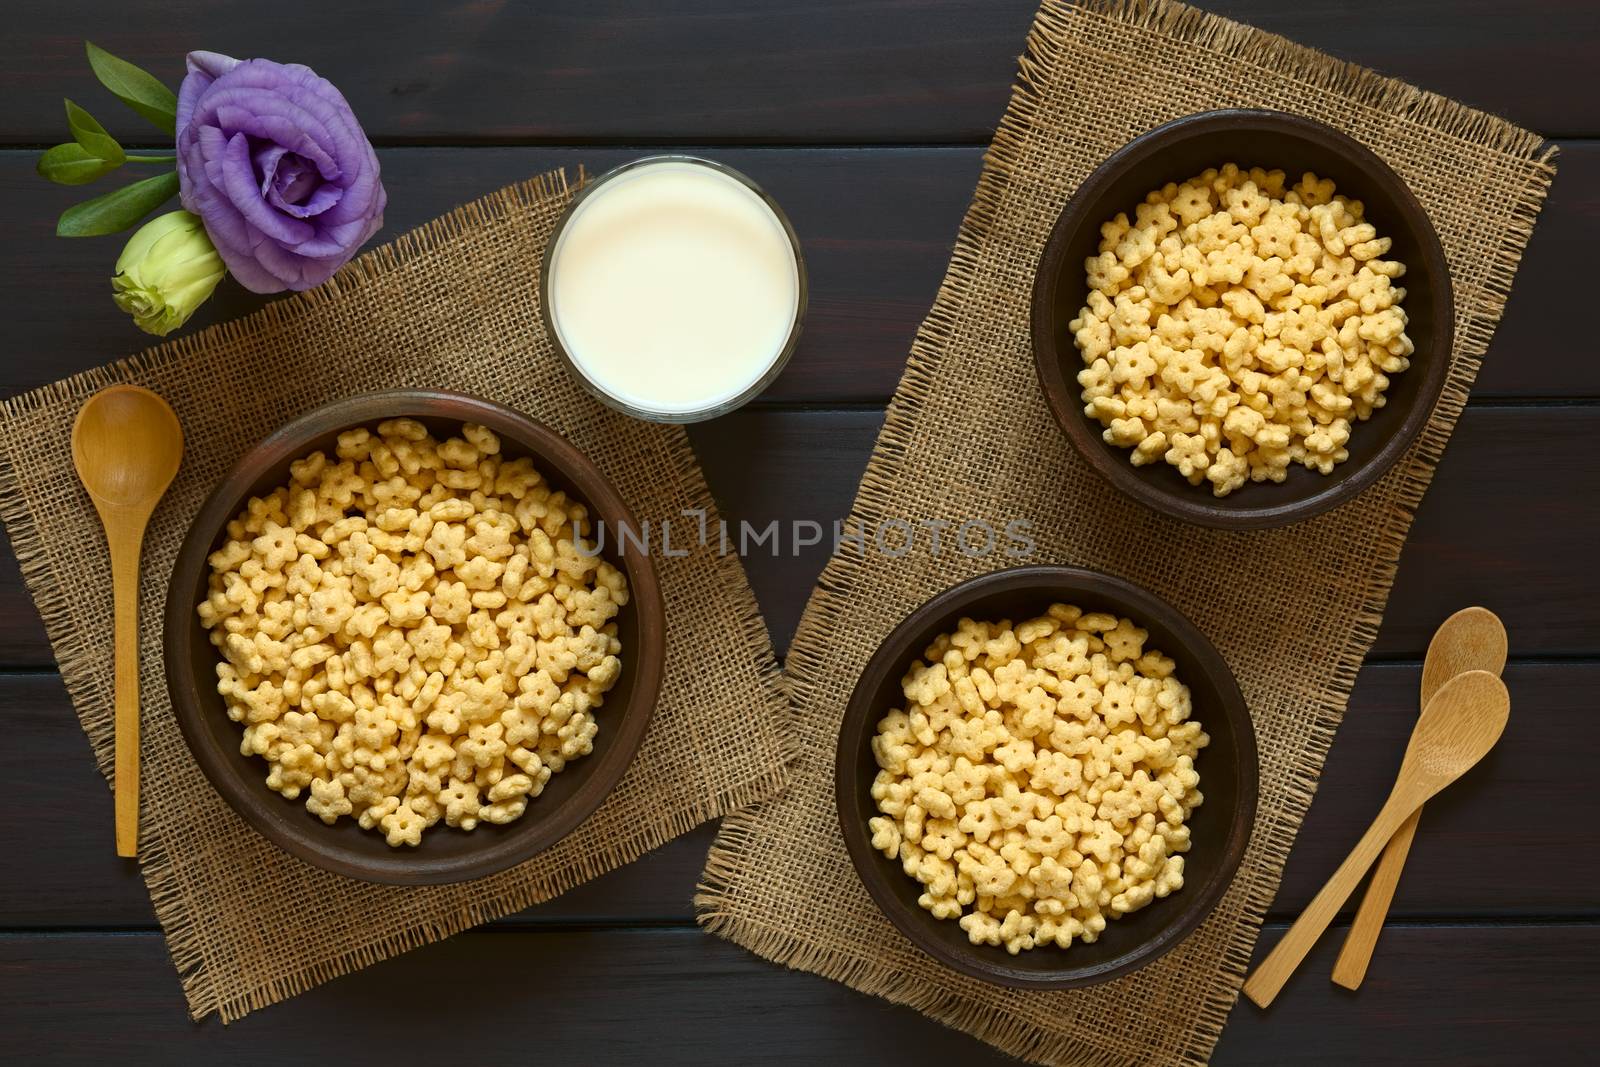 Honey flavored breakfast cereal in three rustic bowls with a glass of milk and wooden spoons on the side, photographed overhead on dark wood with natural light 